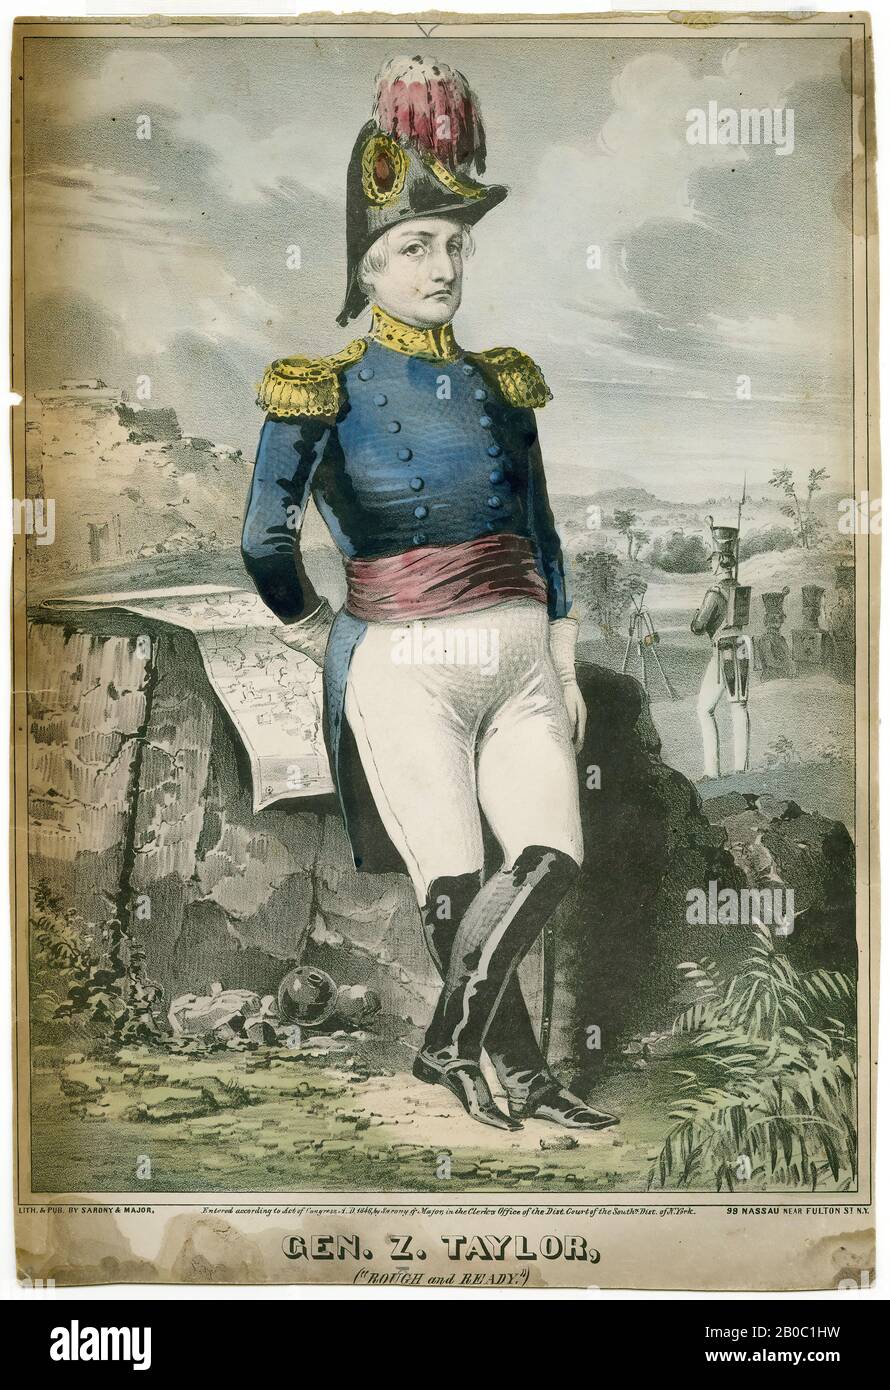 Unknown Artist, Part of a Collection of Mexican-American War Prints, General Z. Taylor ('Rough and Ready'), 1846, color lithograph on paper, 12 15/16 in. x 8 13/16 in. (32.86 cm x 22.38 cm Stock Photo